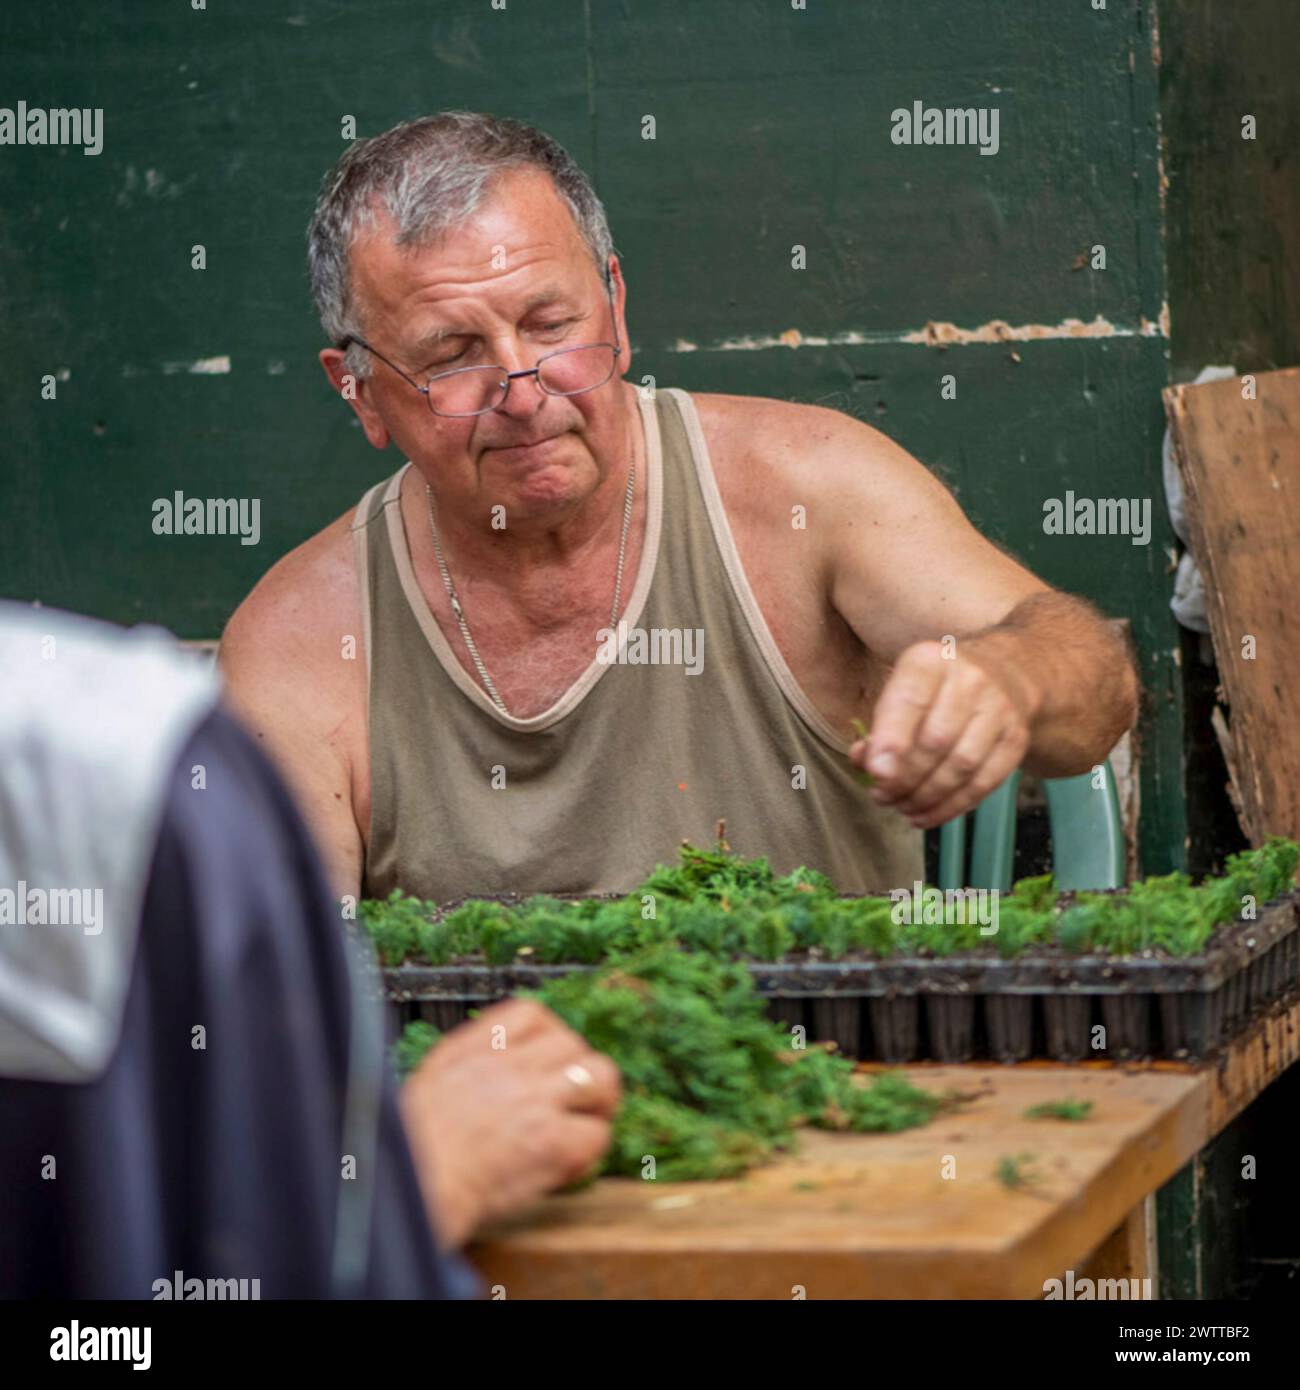 A man carefully tending to plants at a workbench. Stock Photo